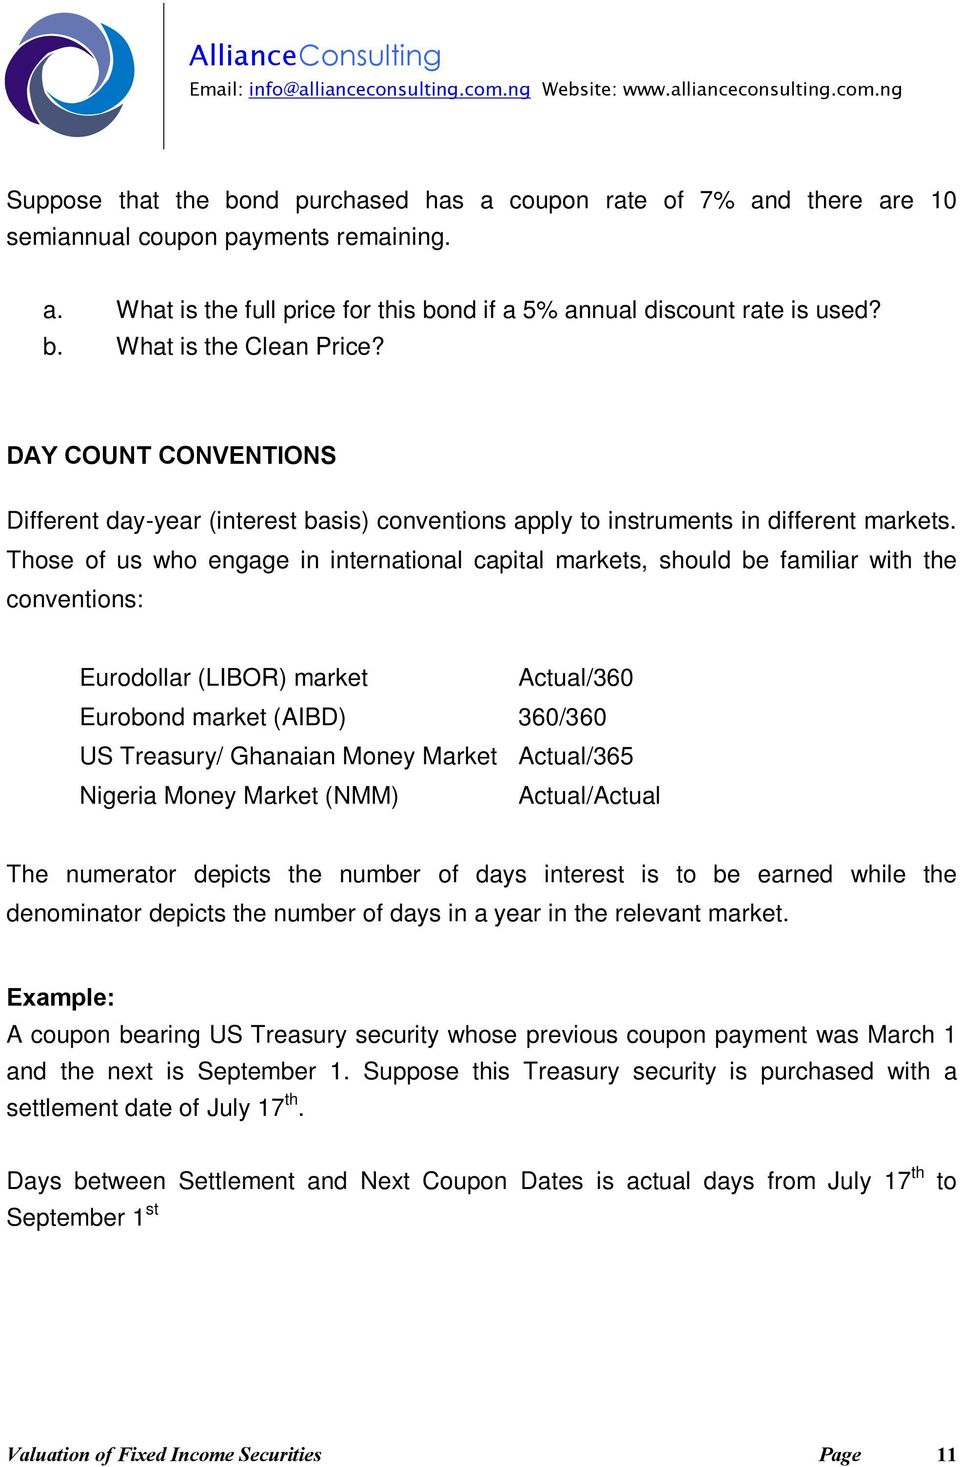 Those of us who engage in international capital markets, should be familiar with the conventions: Eurodollar (LIBOR) market Actual/360 Eurobond market (AIBD) 360/360 US Treasury/ Ghanaian Money